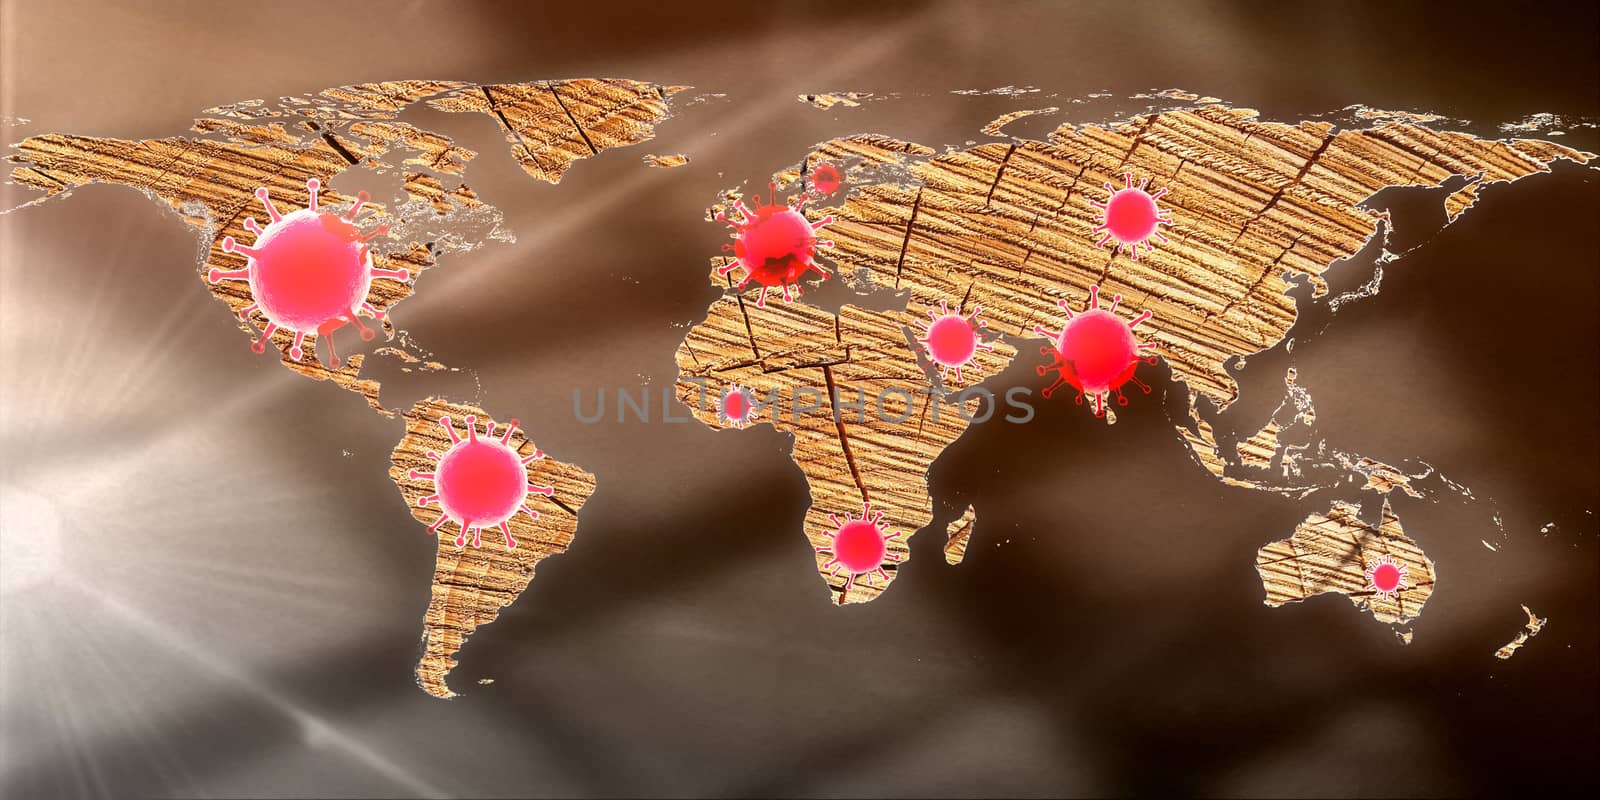 3D-Illustration of a world map showing the corona virus hotspots by MP_foto71